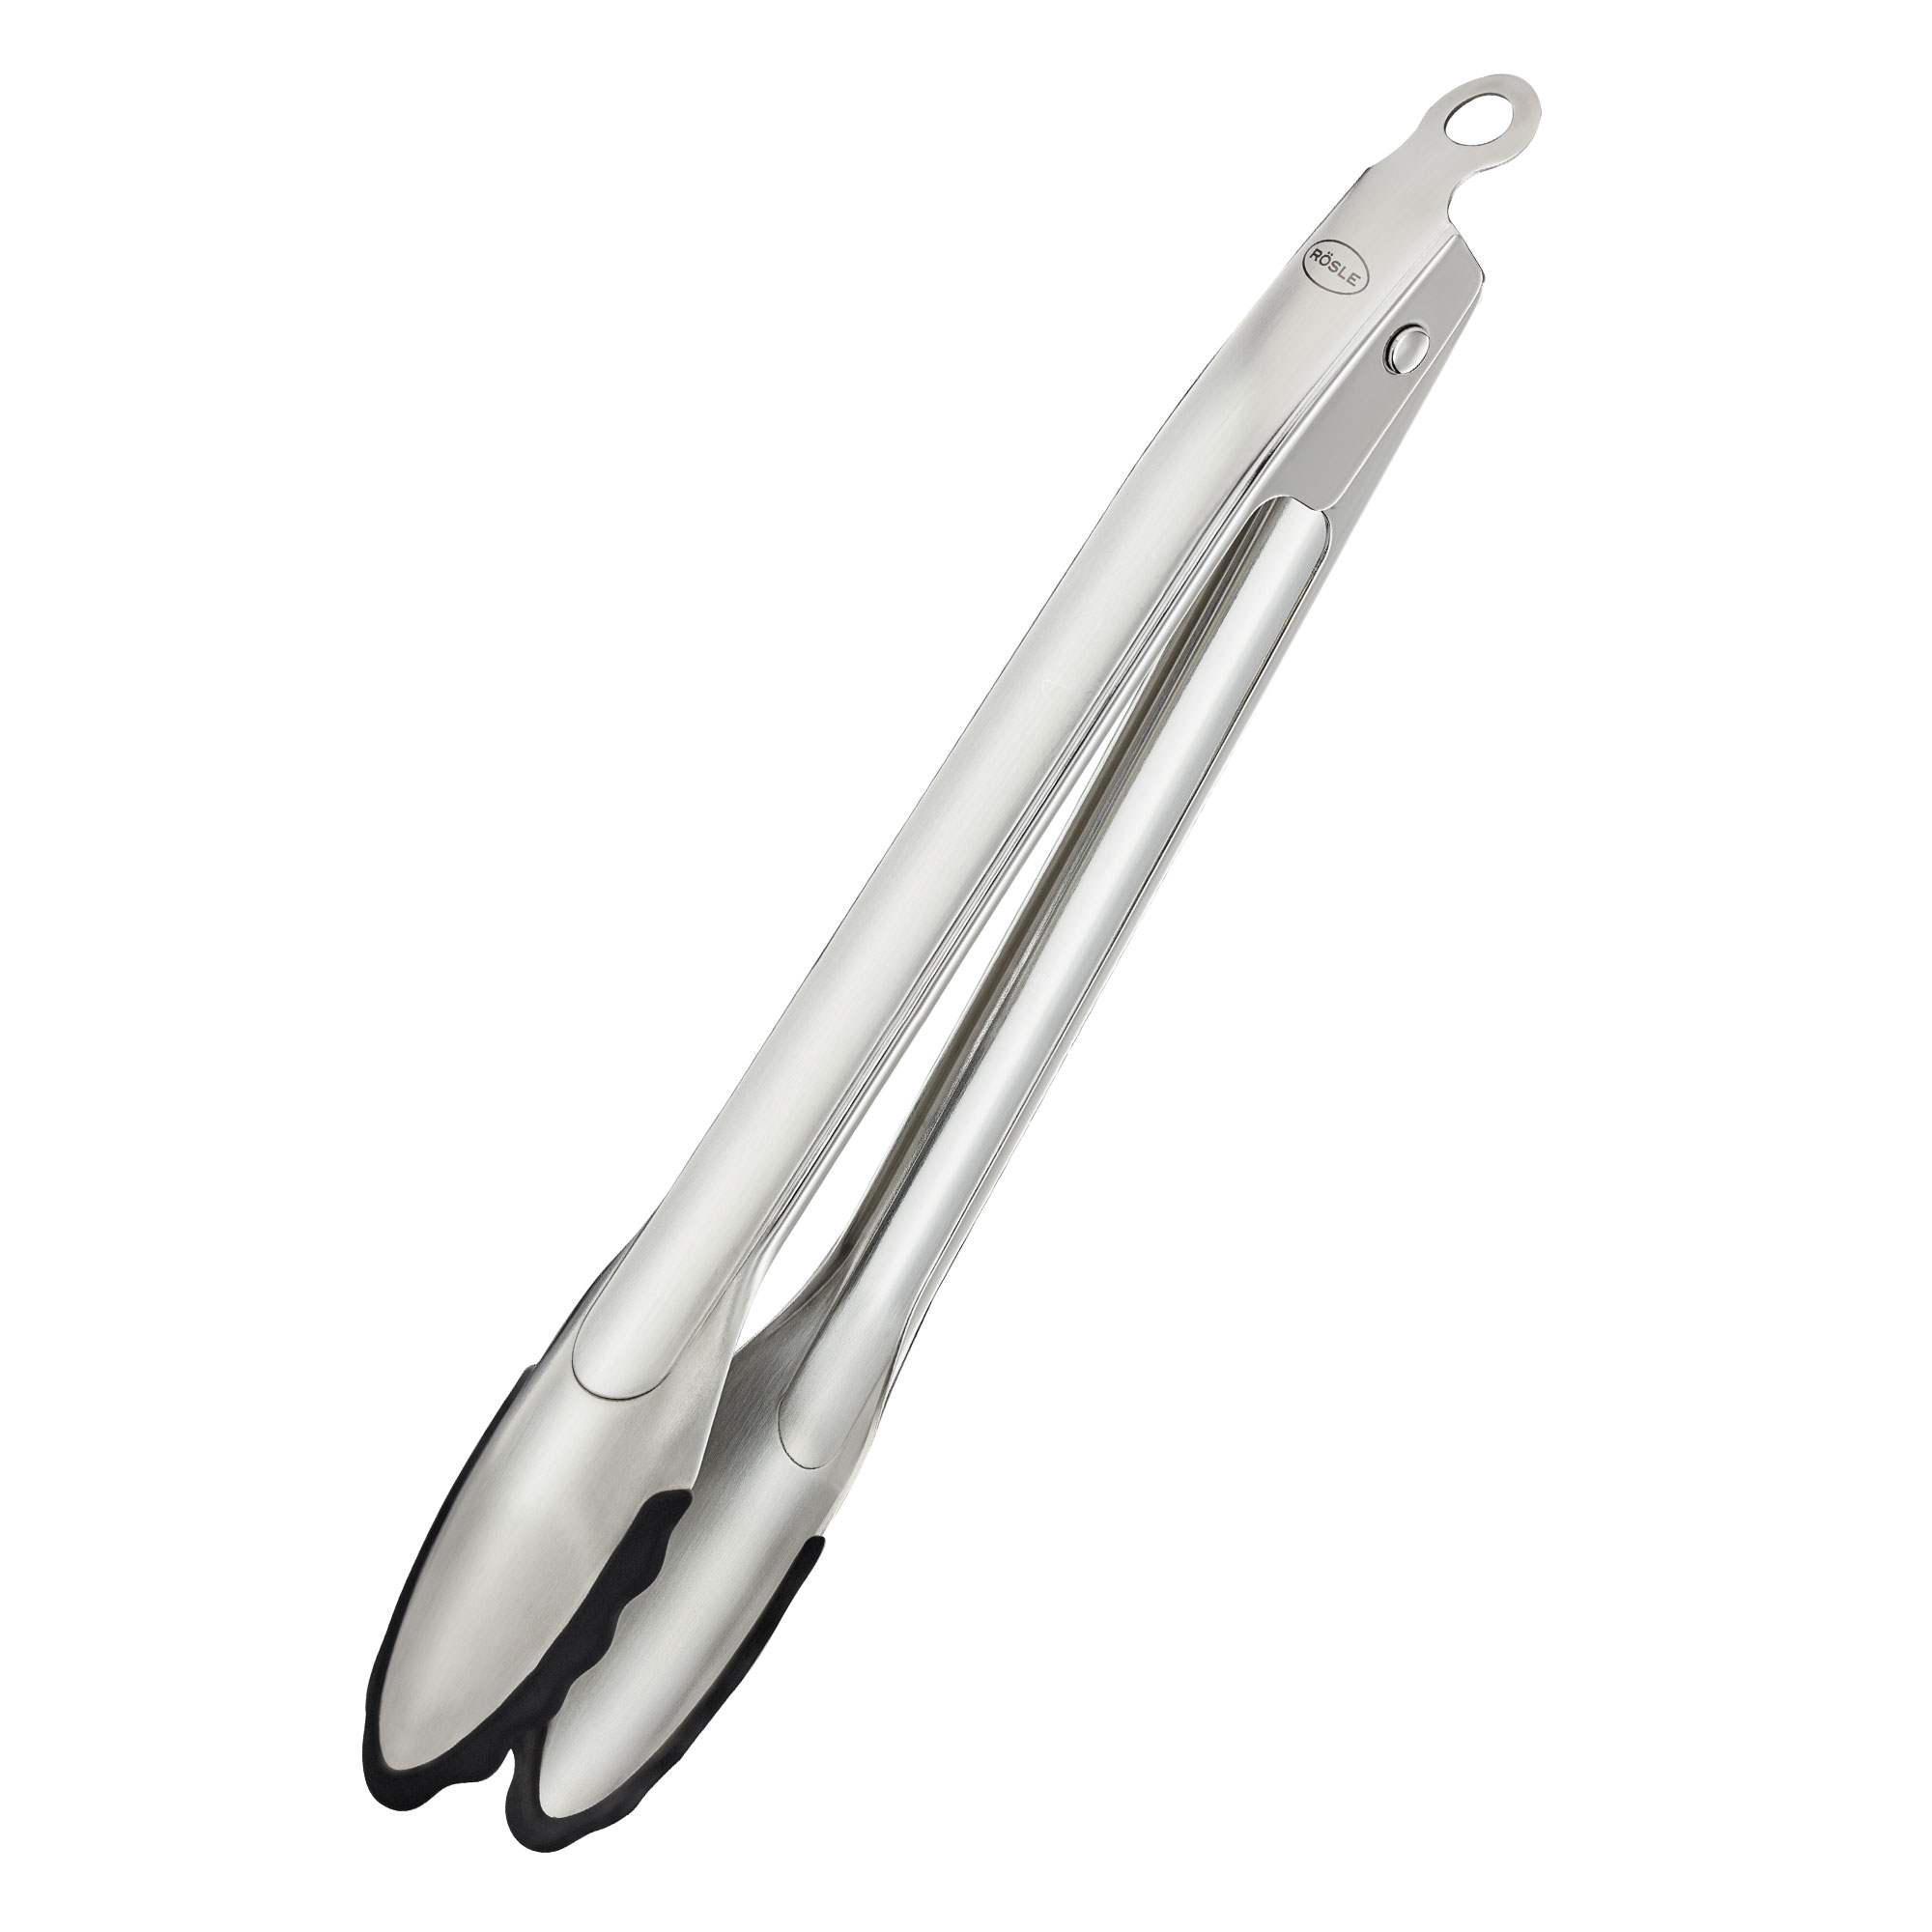 Black Silicone and Stainless Steel Tongs - World Market